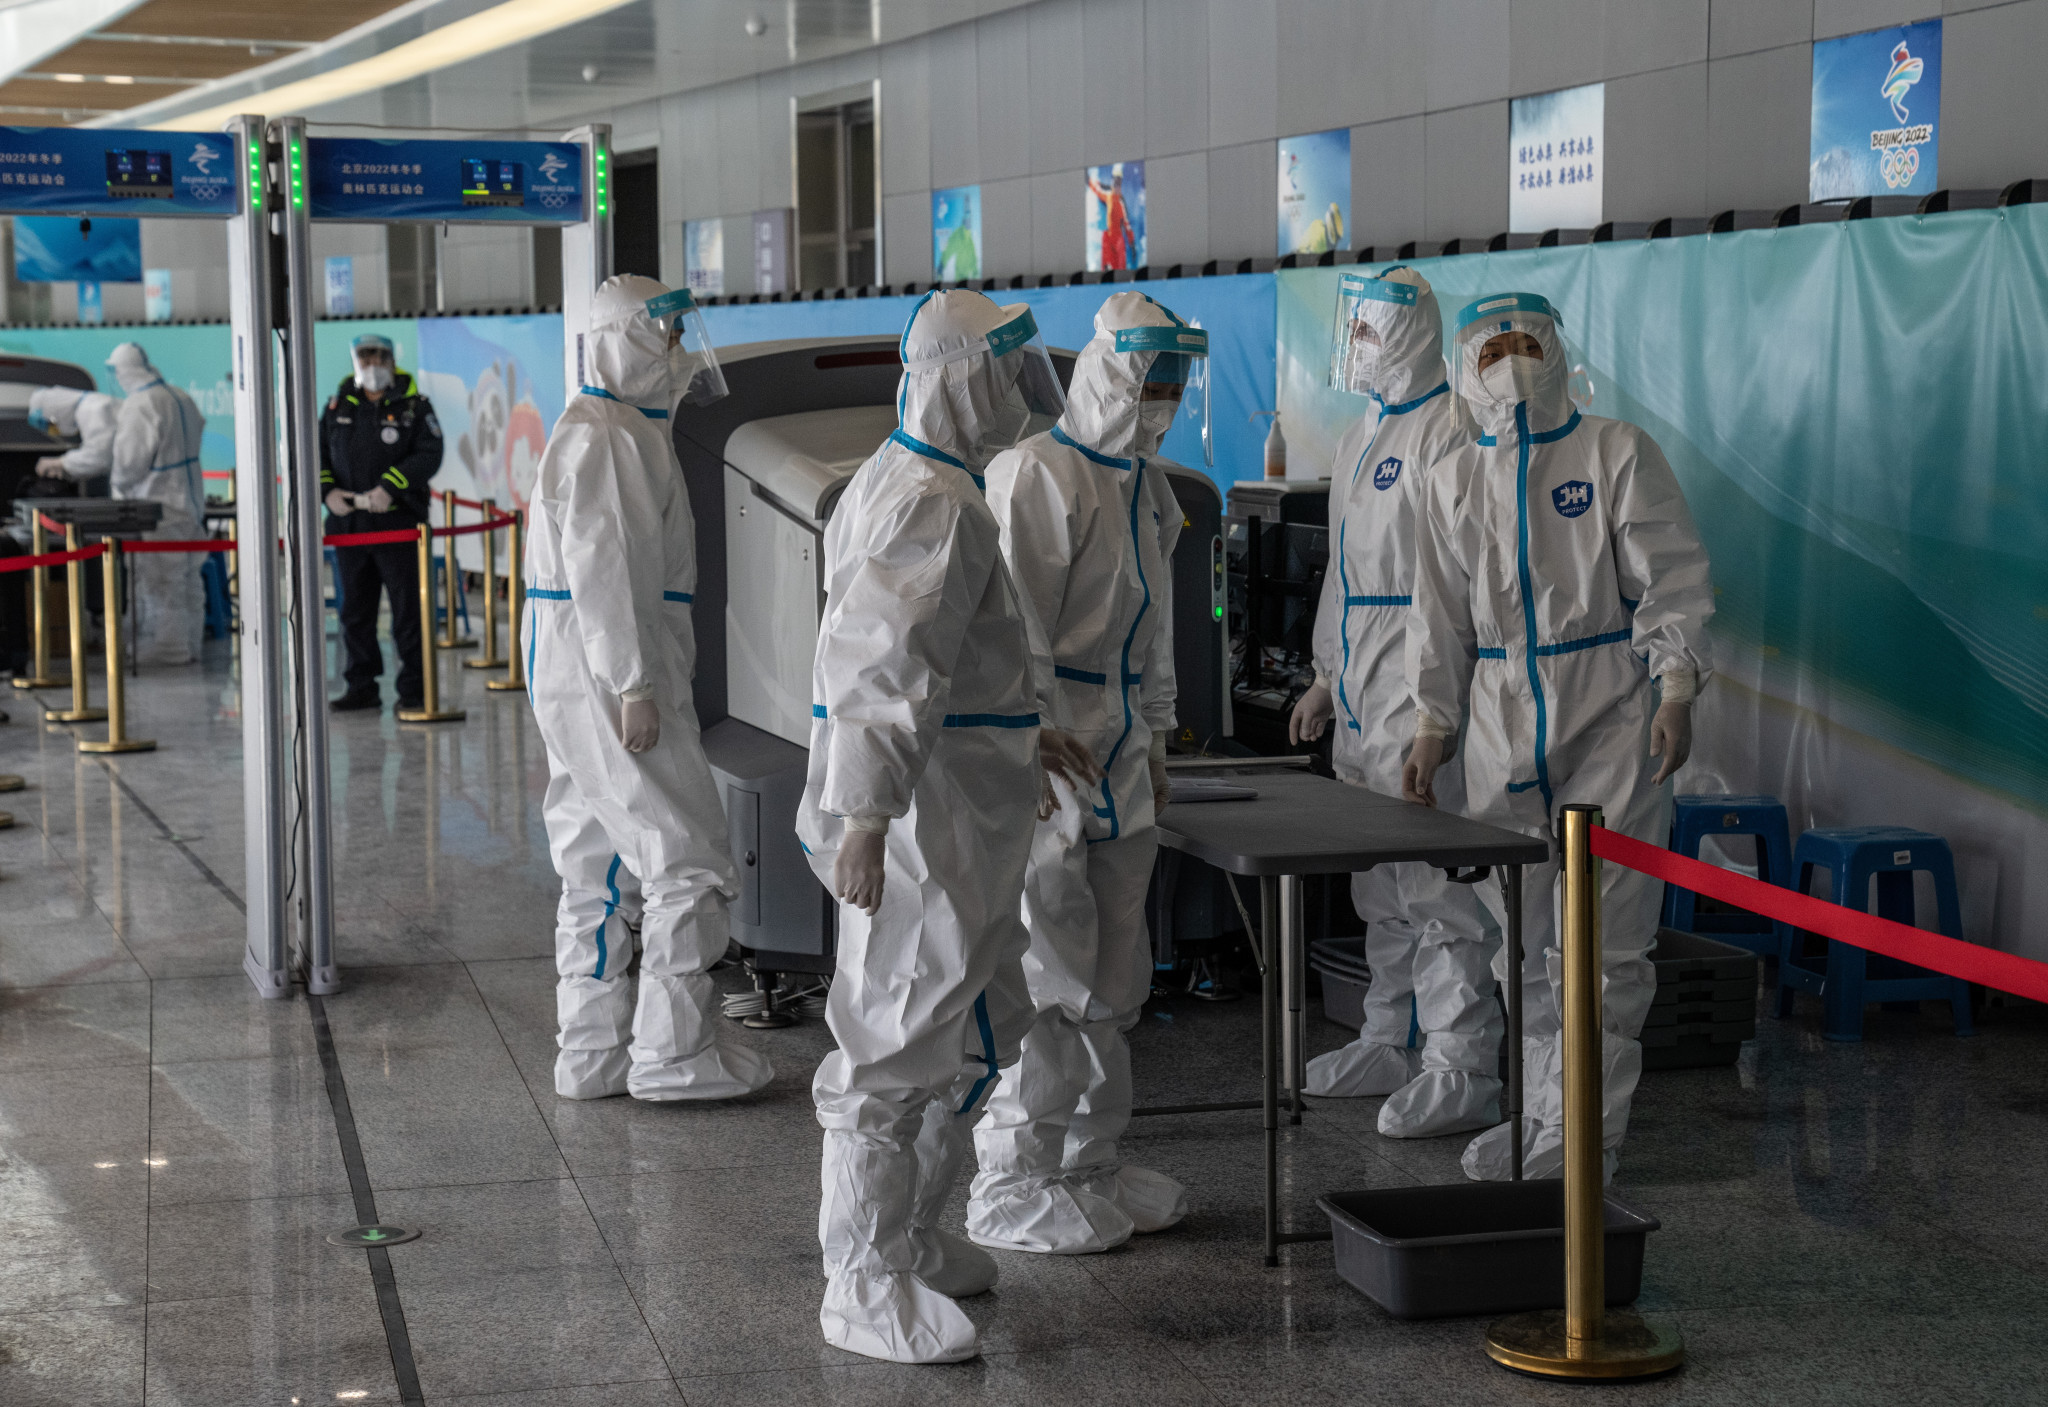 Security staff in full personal protective kit wait to check people arriving in Zhangjiakou where the German support staff member tested positive for COVID-19 ©Getty Images